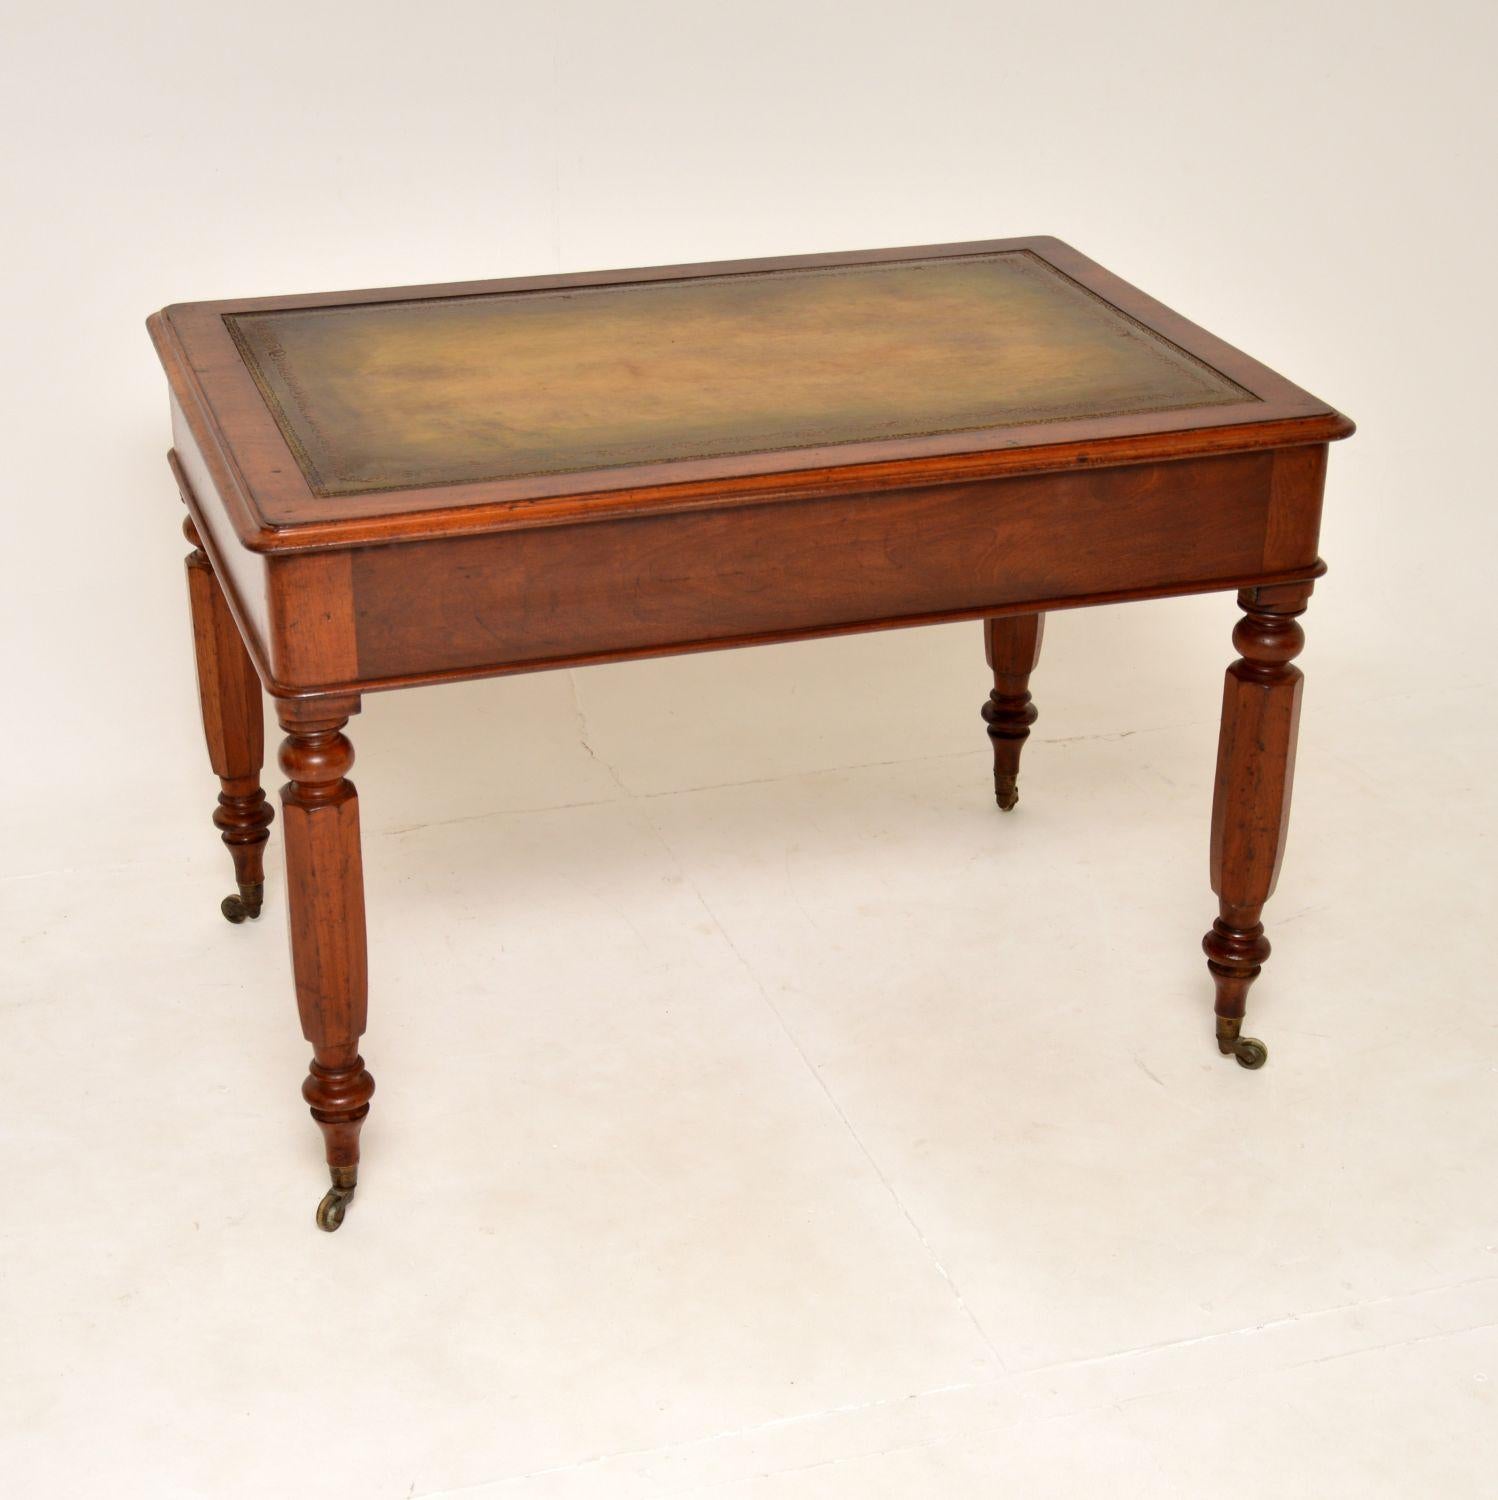 Mid-19th Century Antique William IV Leather Top Writing Table / Desk For Sale